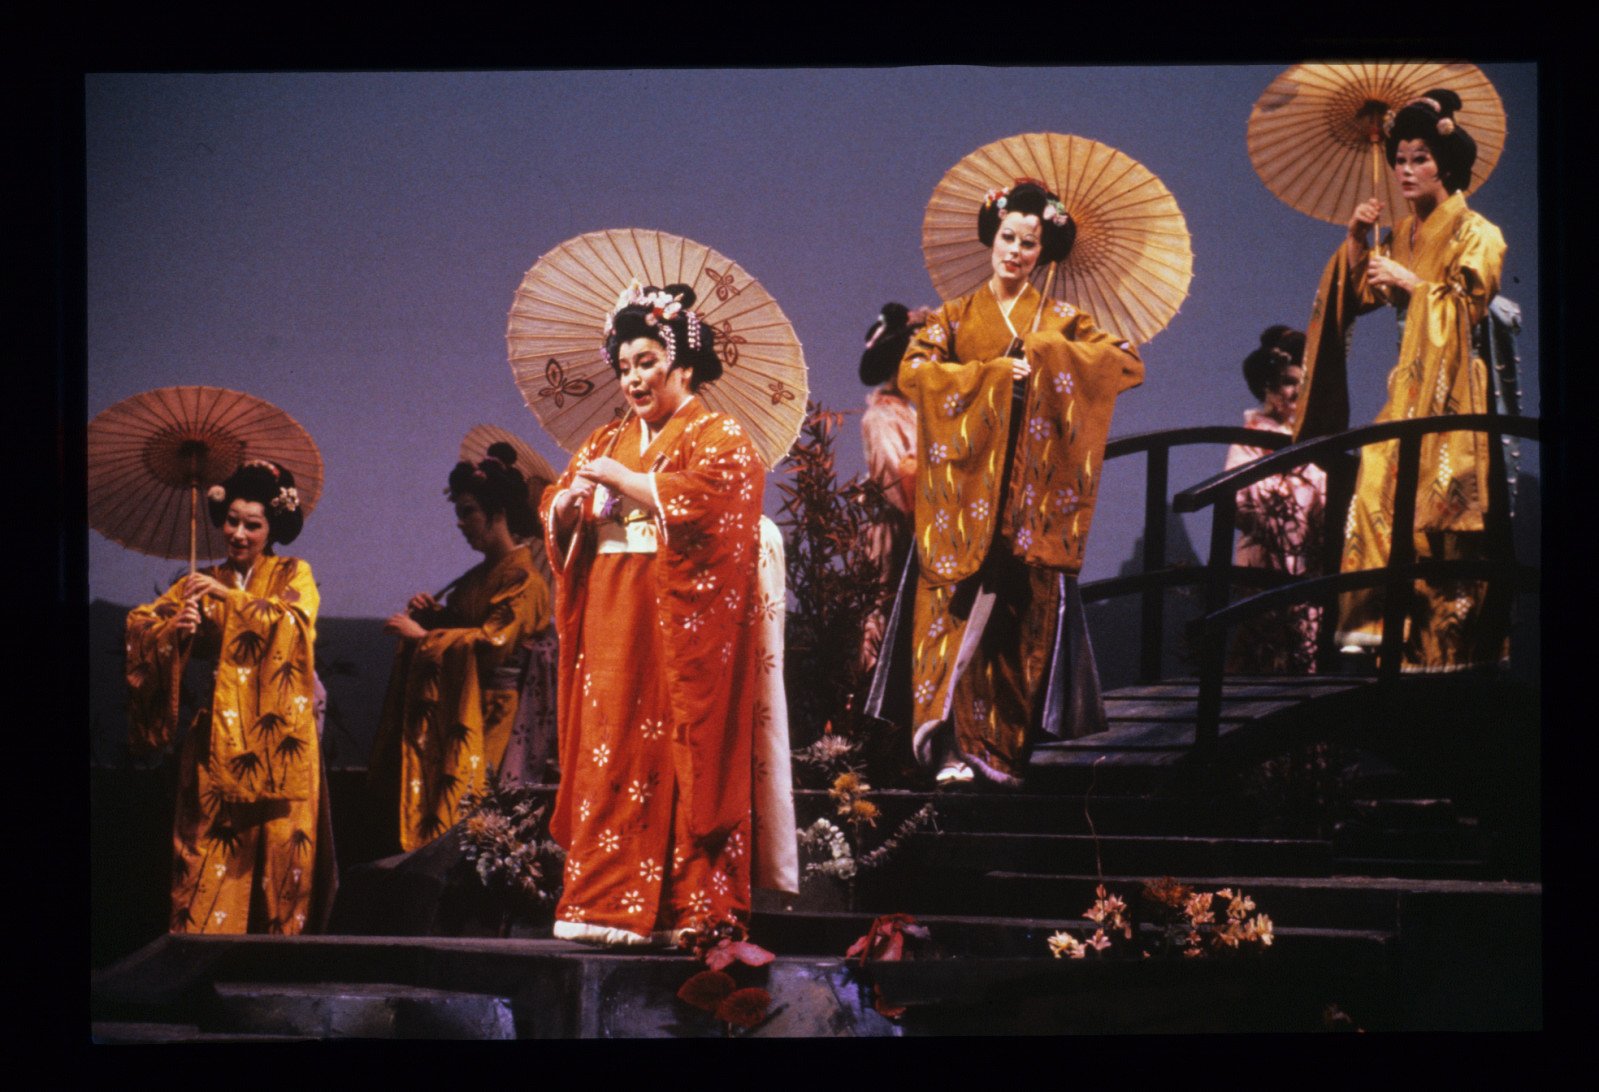 From San Francisco Opera's production of Madame Butterfly, 1989.